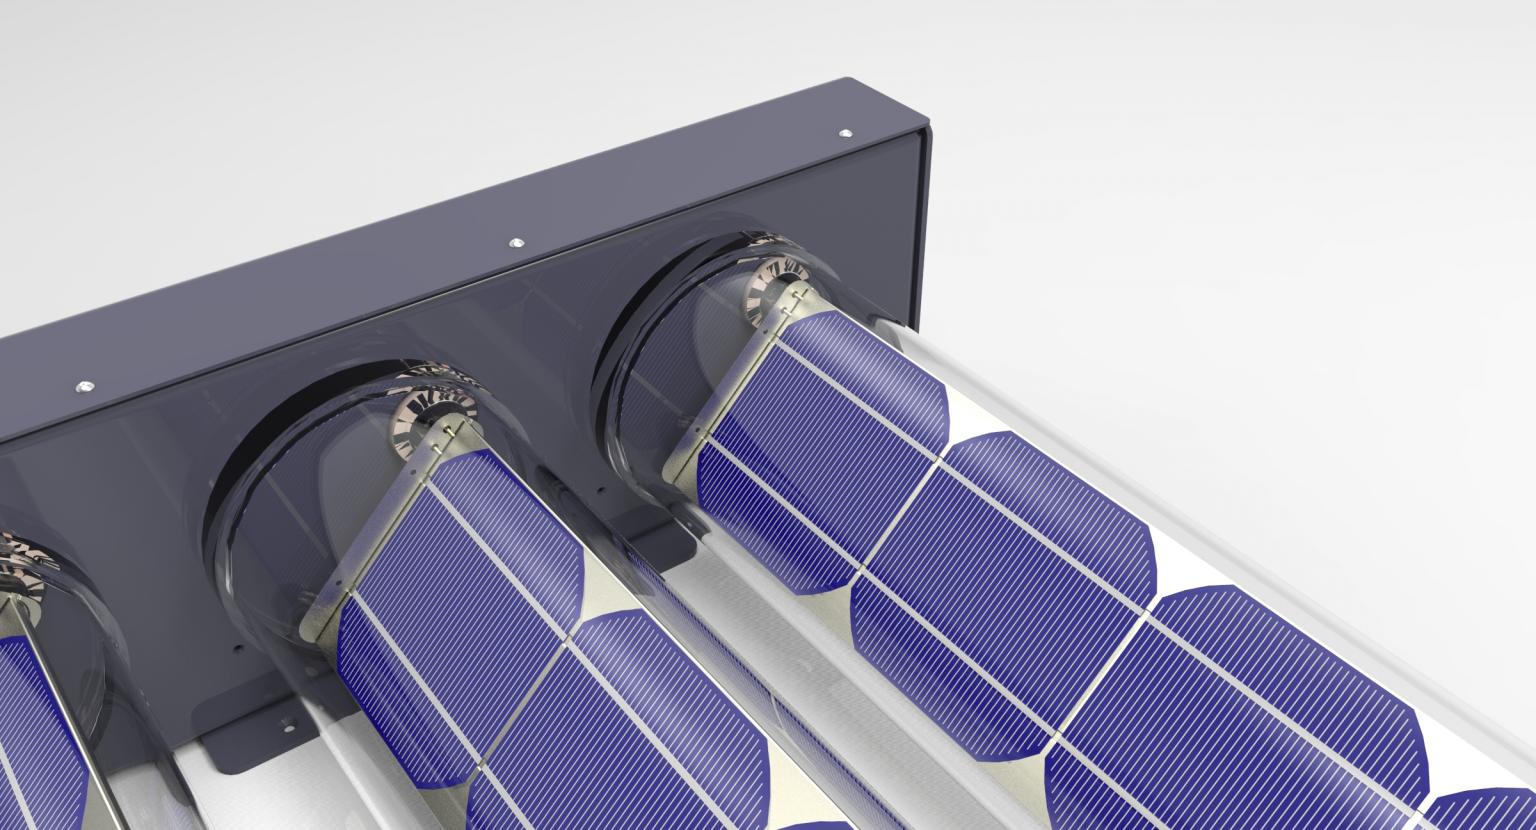 Solar panels generate both heat and electricity | Engineer Live